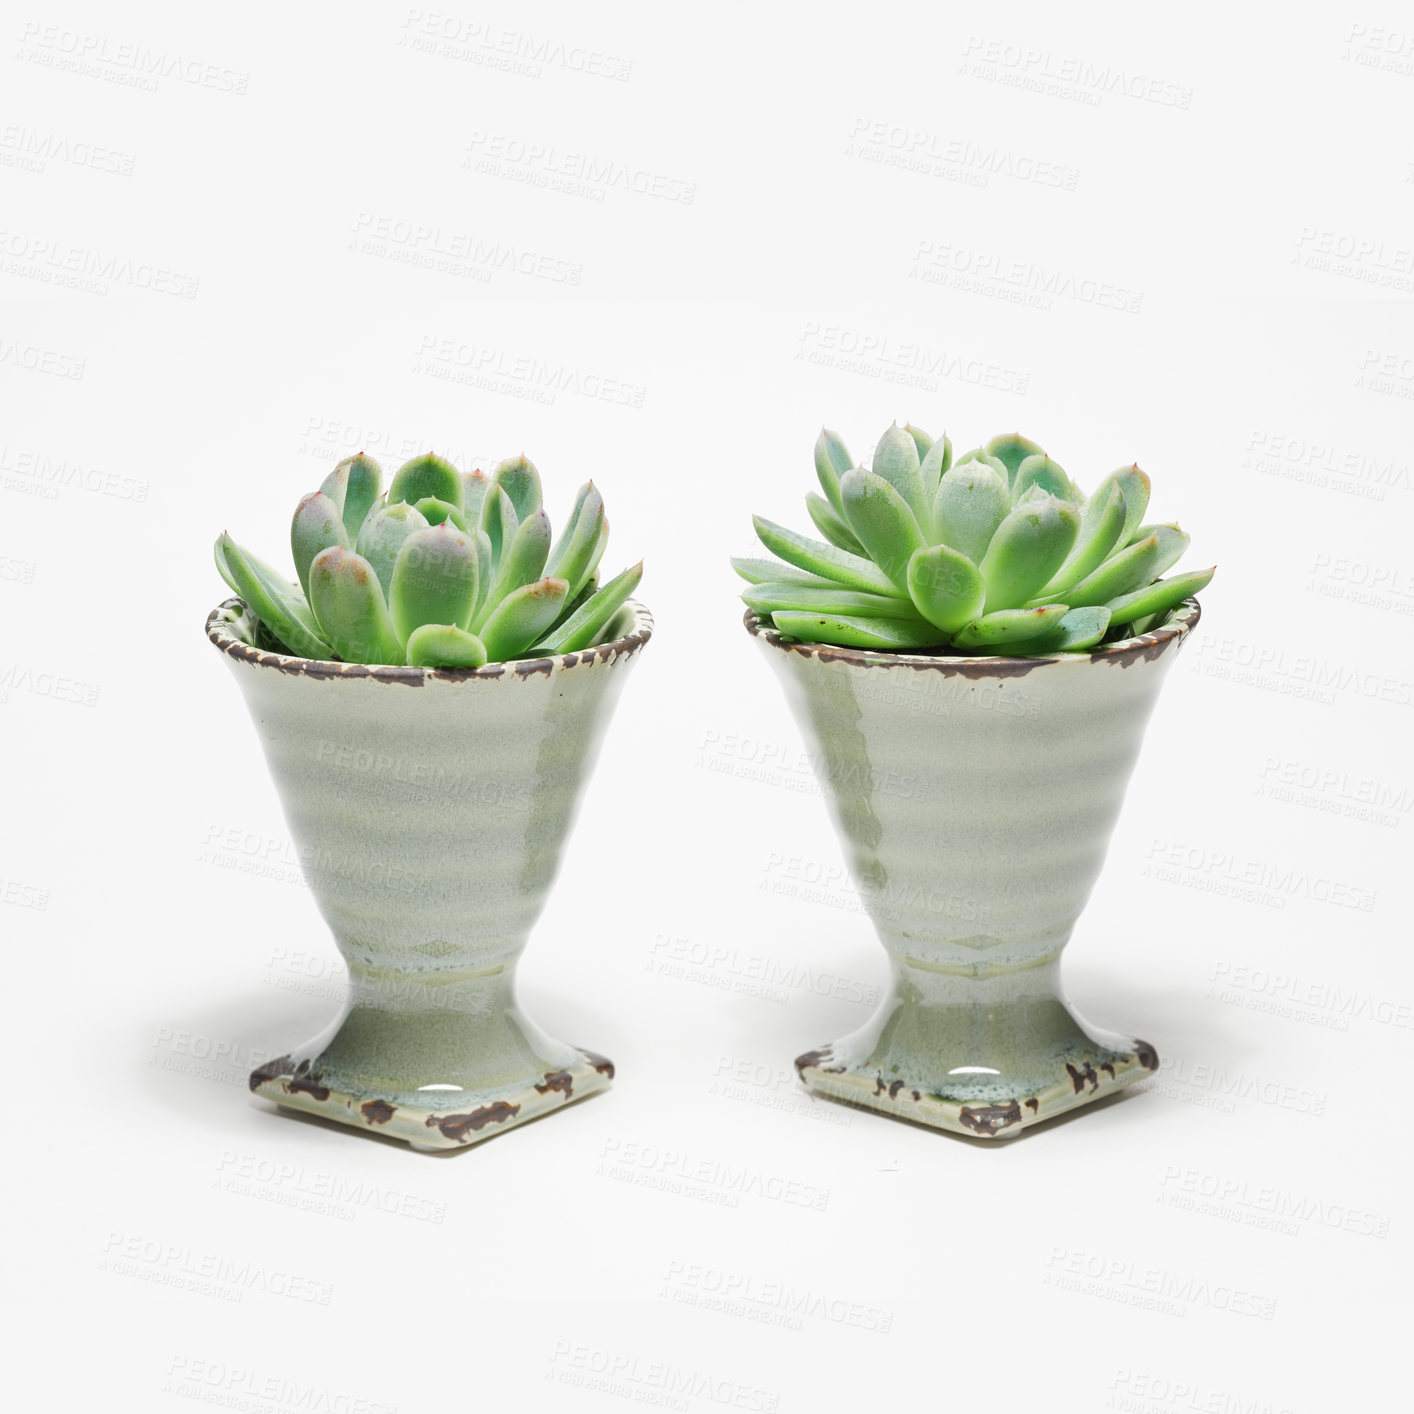 Buy stock photo Two Mexican snow ball plants arranged in porcelain eggcups isolated on a white copyspace background. Low maintenance succulents in a vase with copy space. Perfect houseplant to decorate a home space